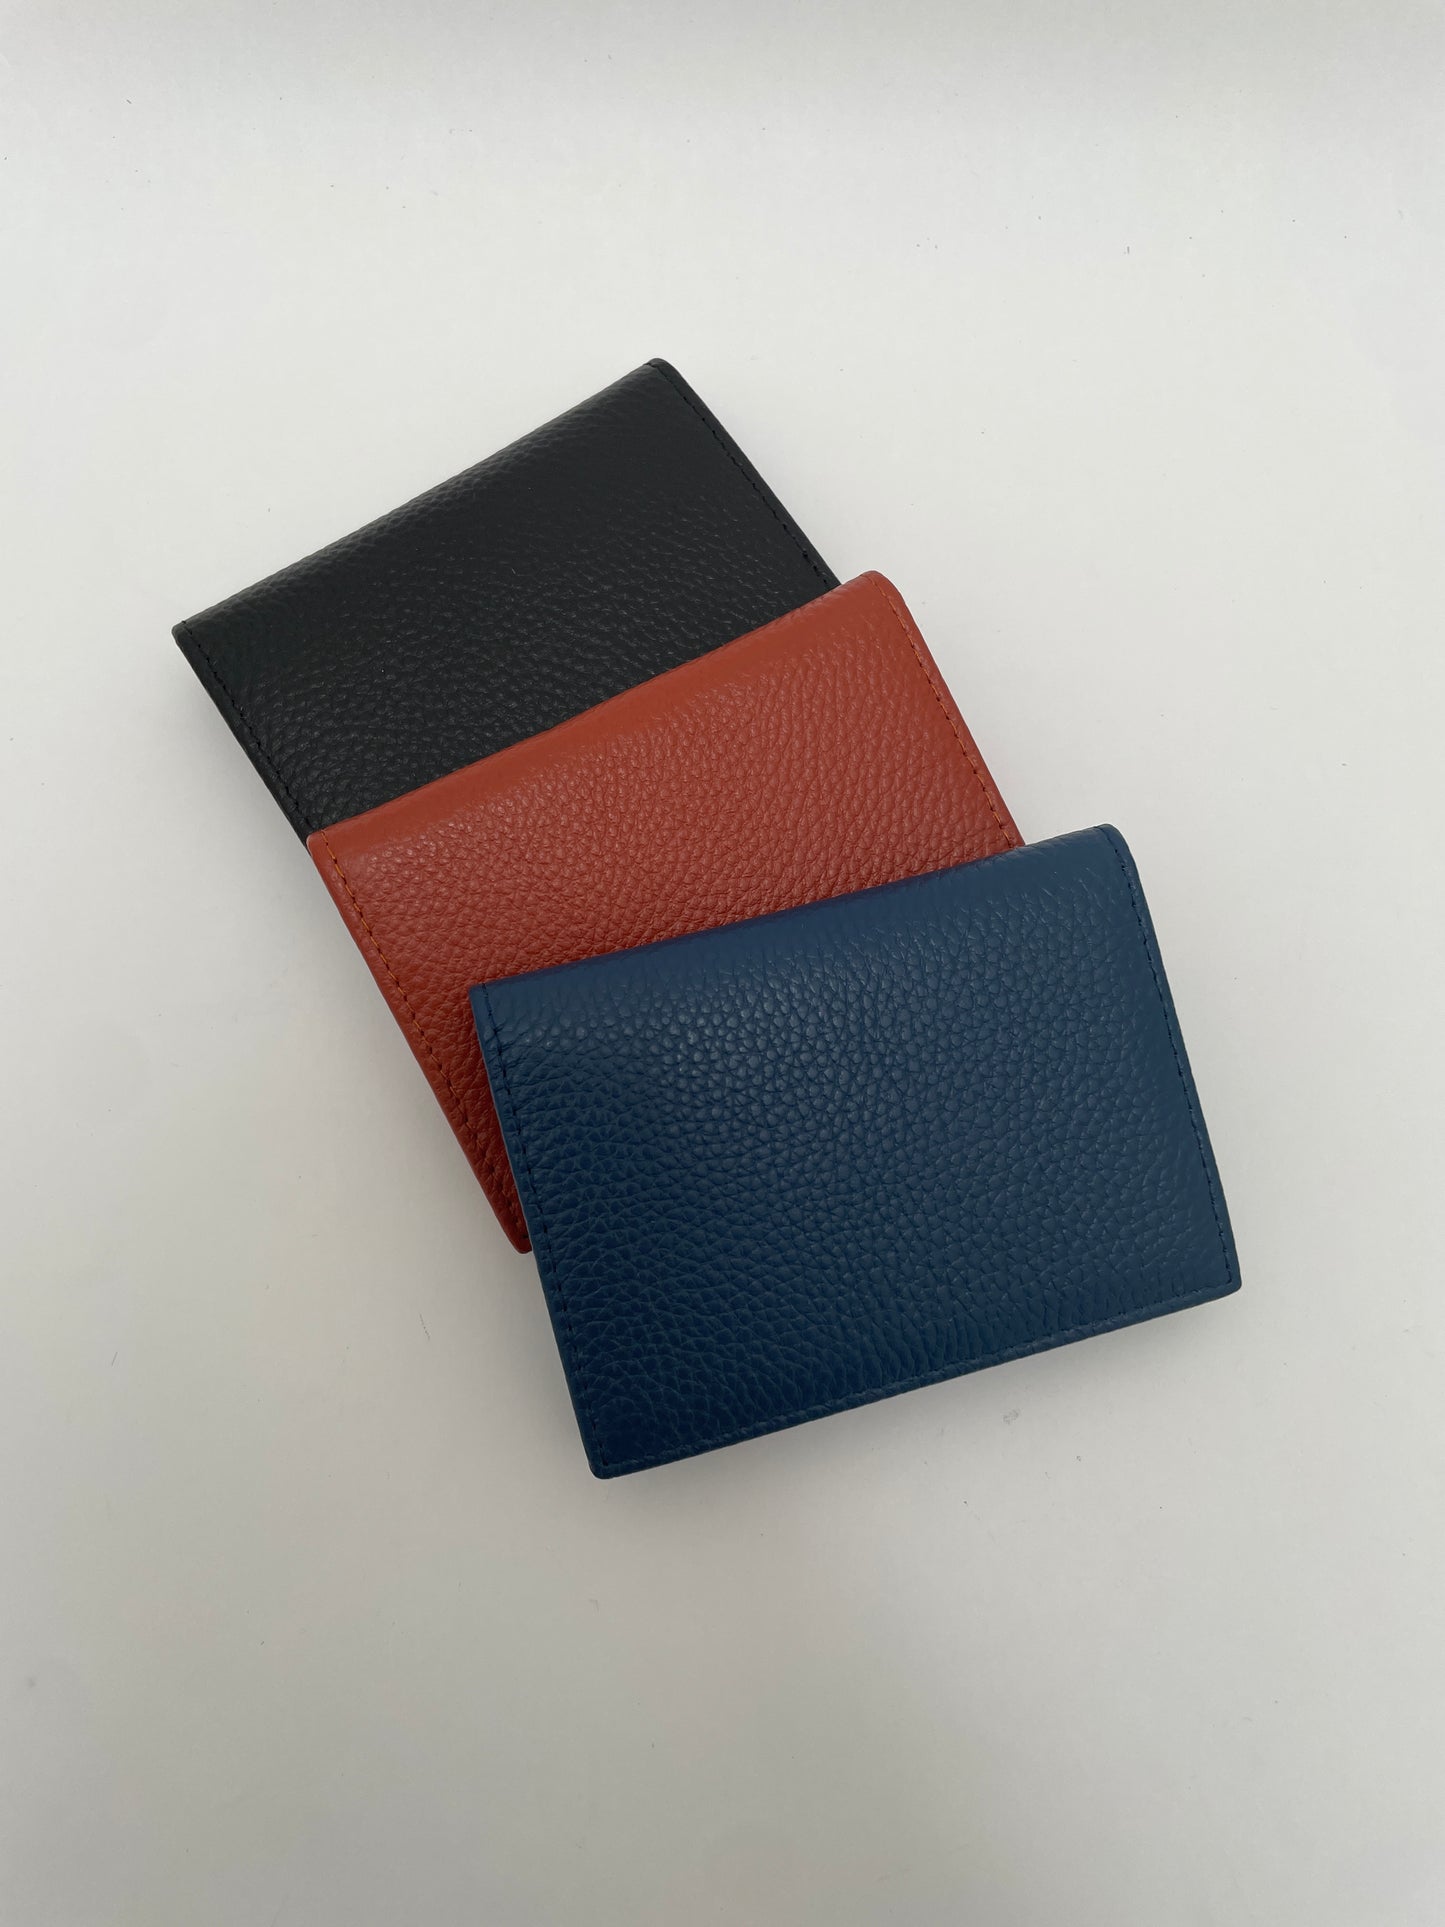 PROMENADE LEATHER BUSINESS CARD HOLDER NAVY